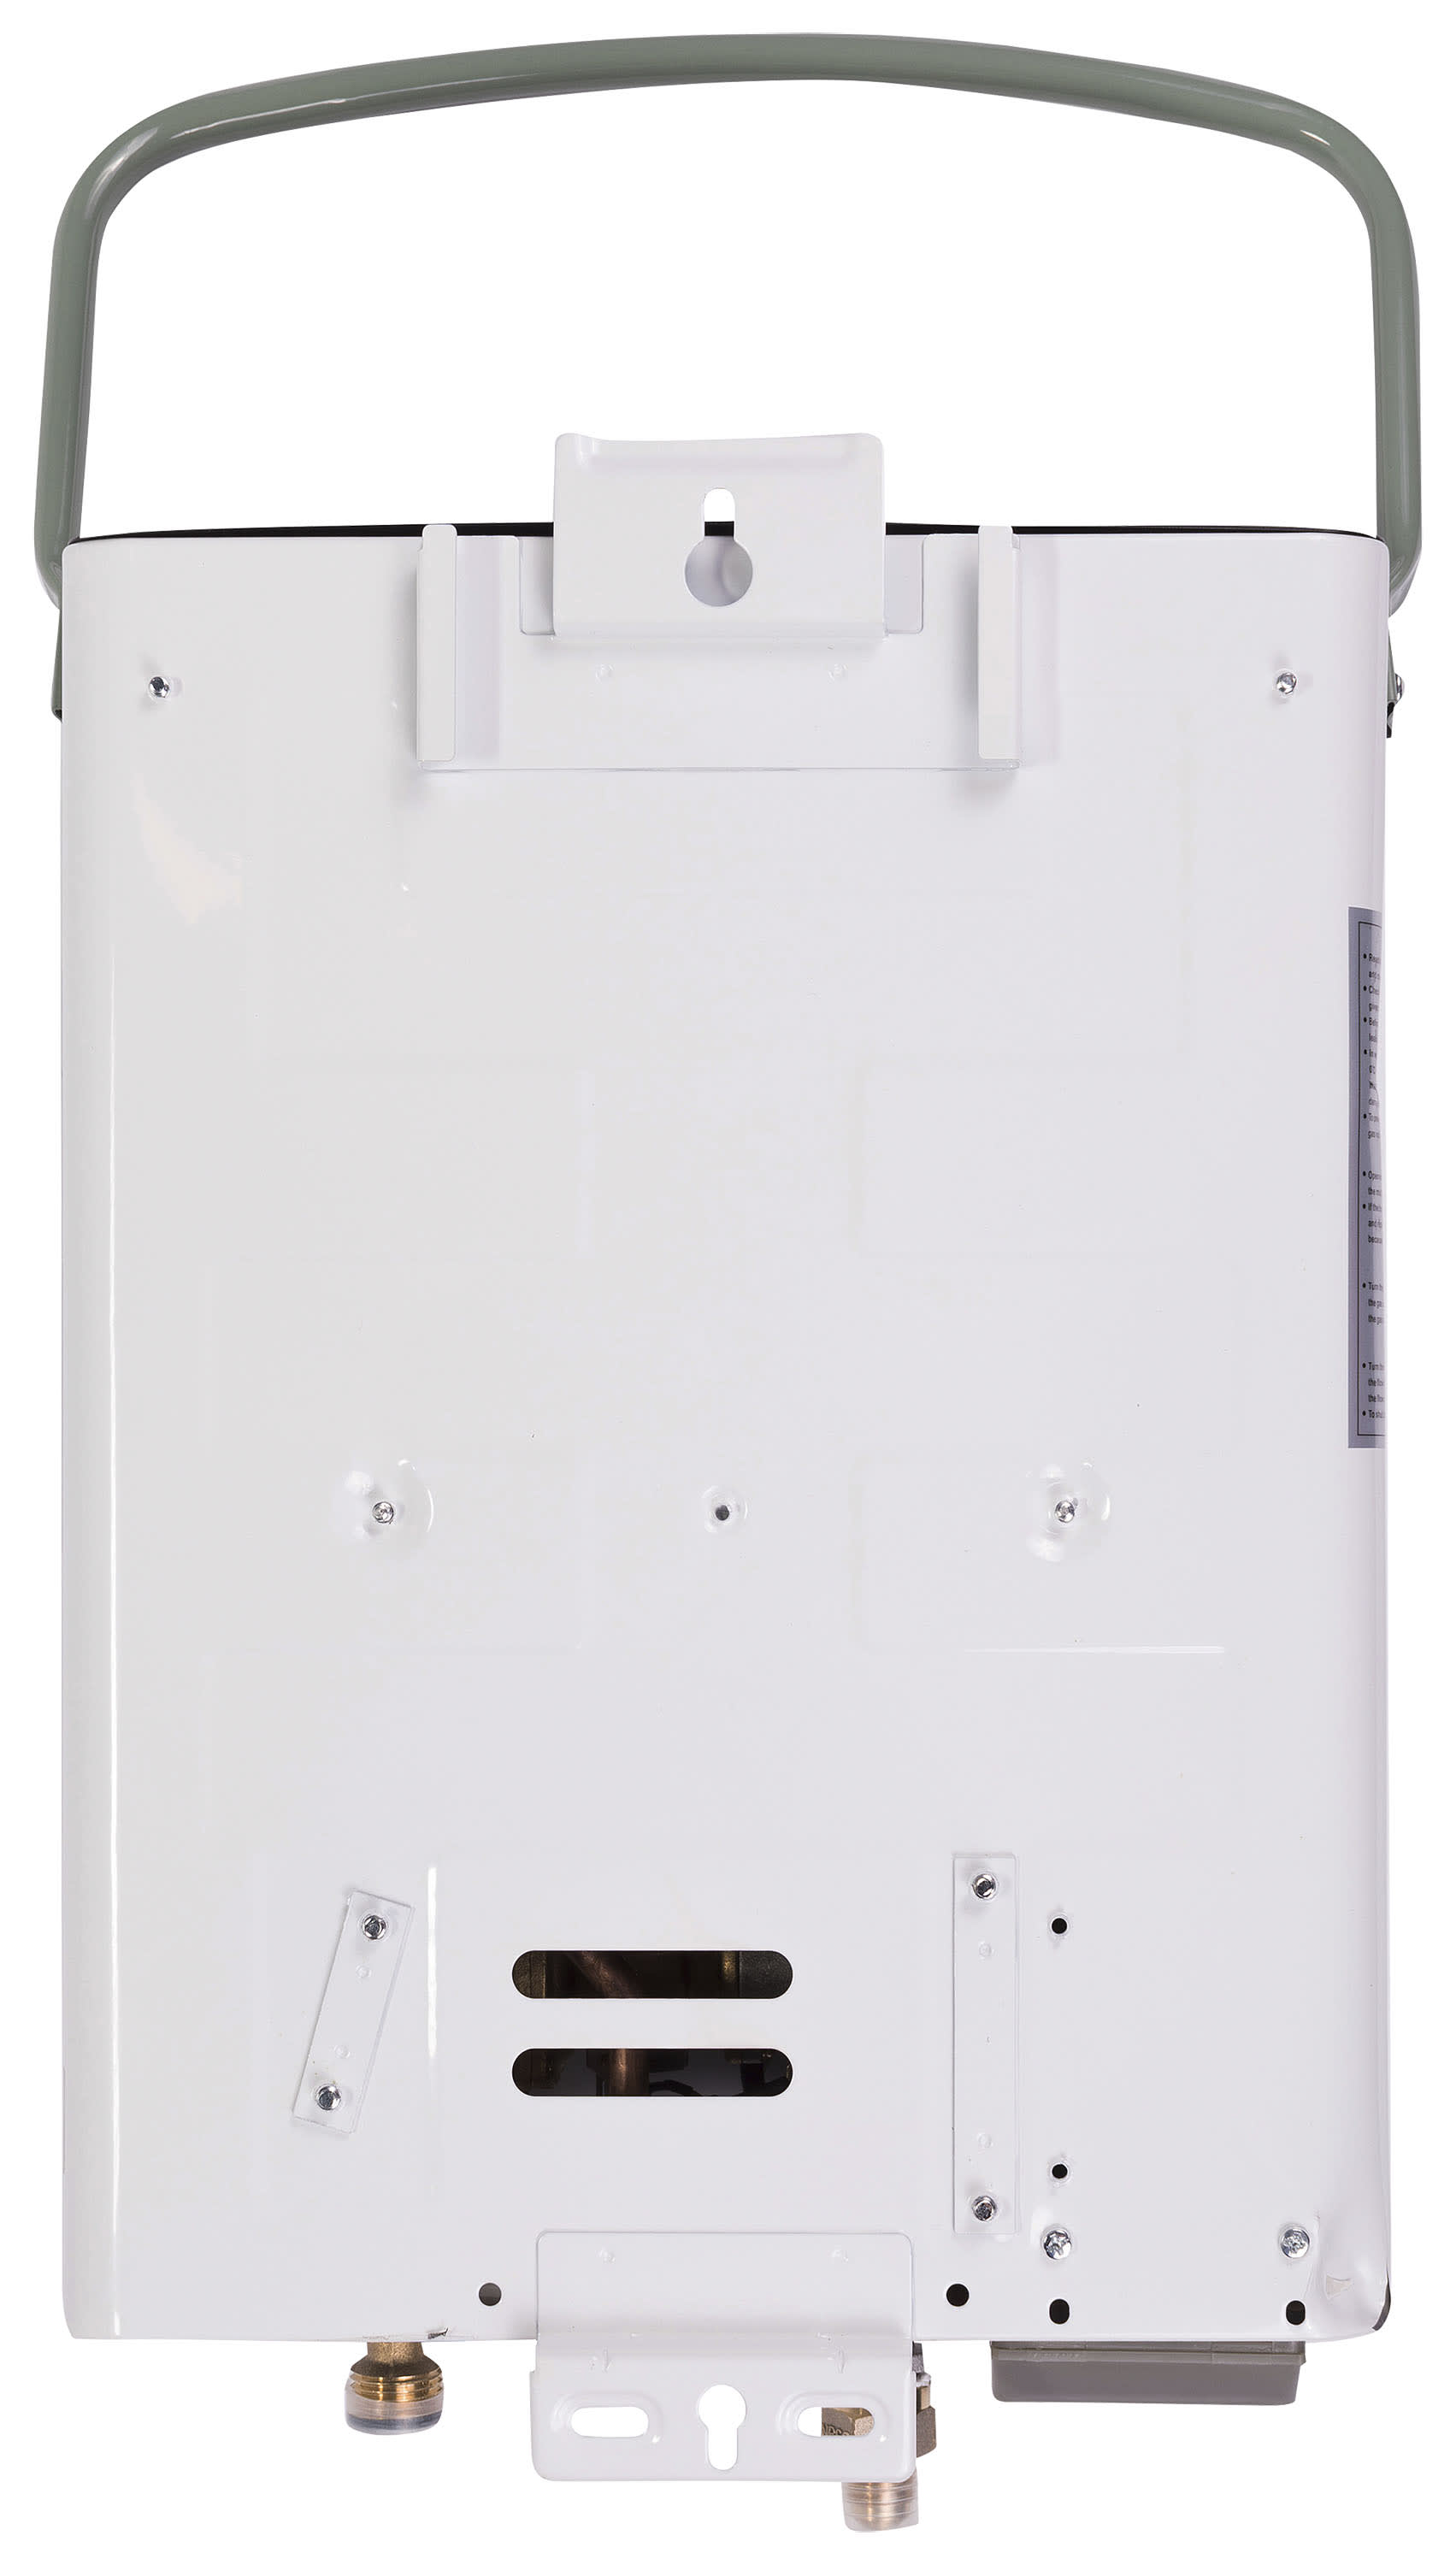 Eccotemp® L5 Portable Tankless Water Heater